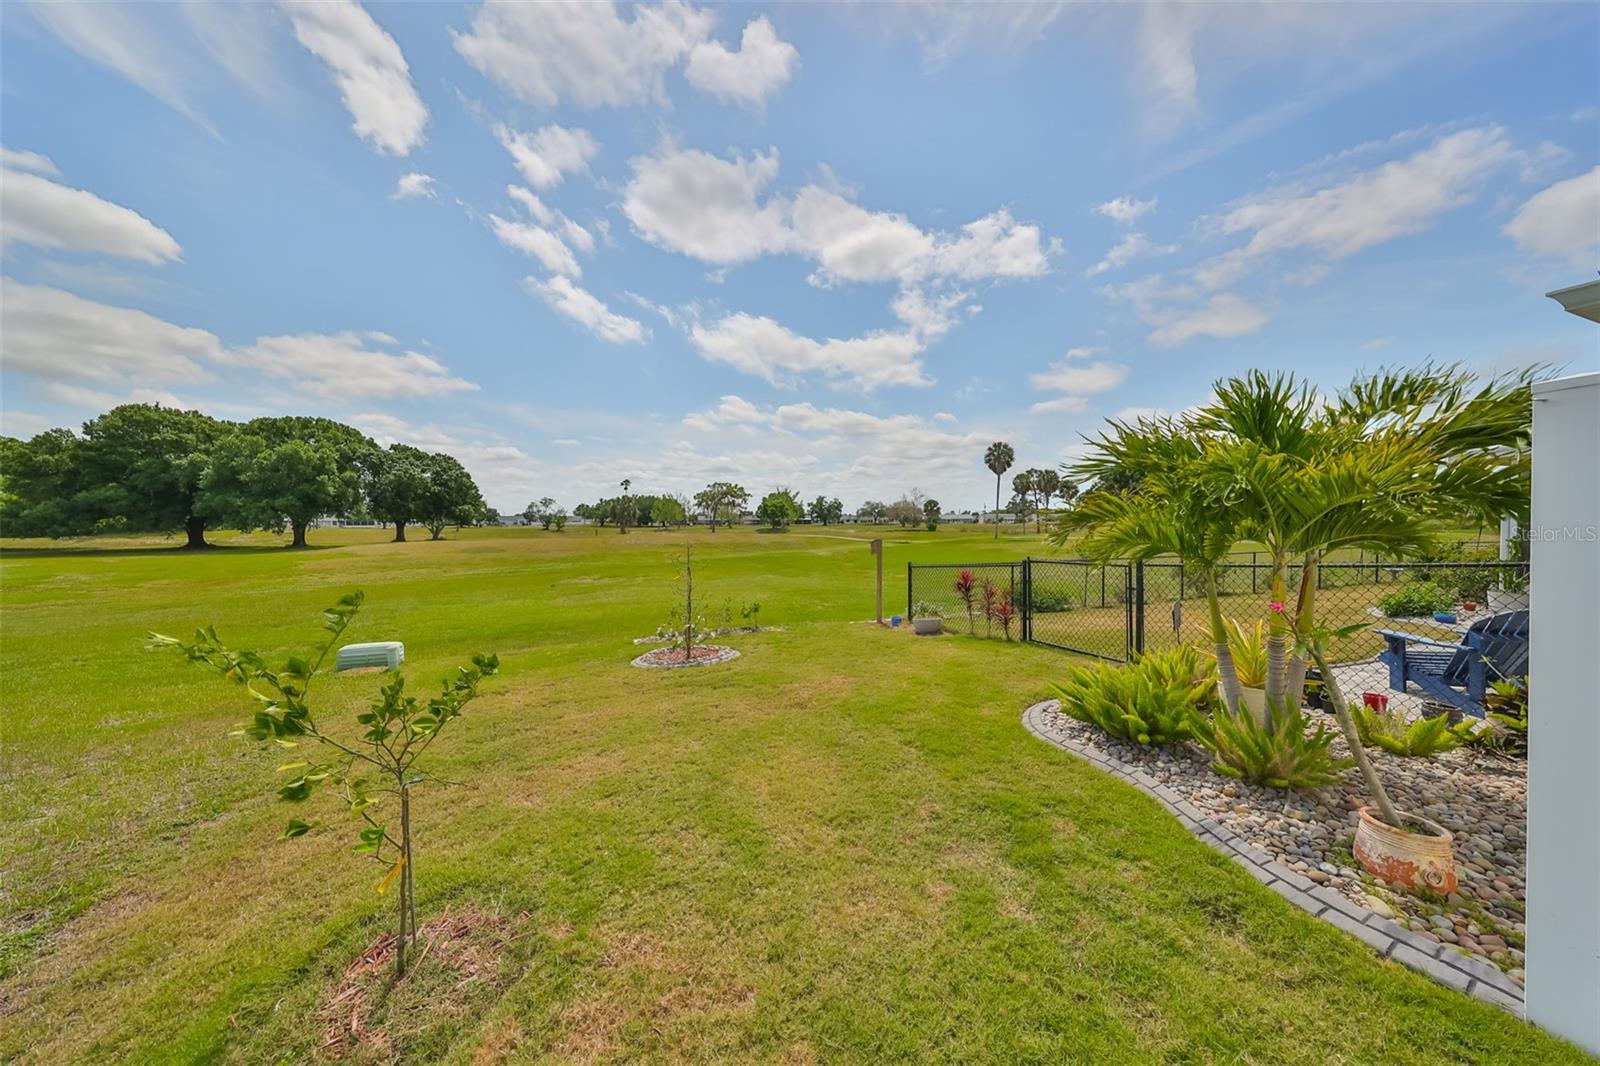 This fenced in backyard is directly overlooking the greenbelt and has lots of new and beautifully landscaped vegetation.